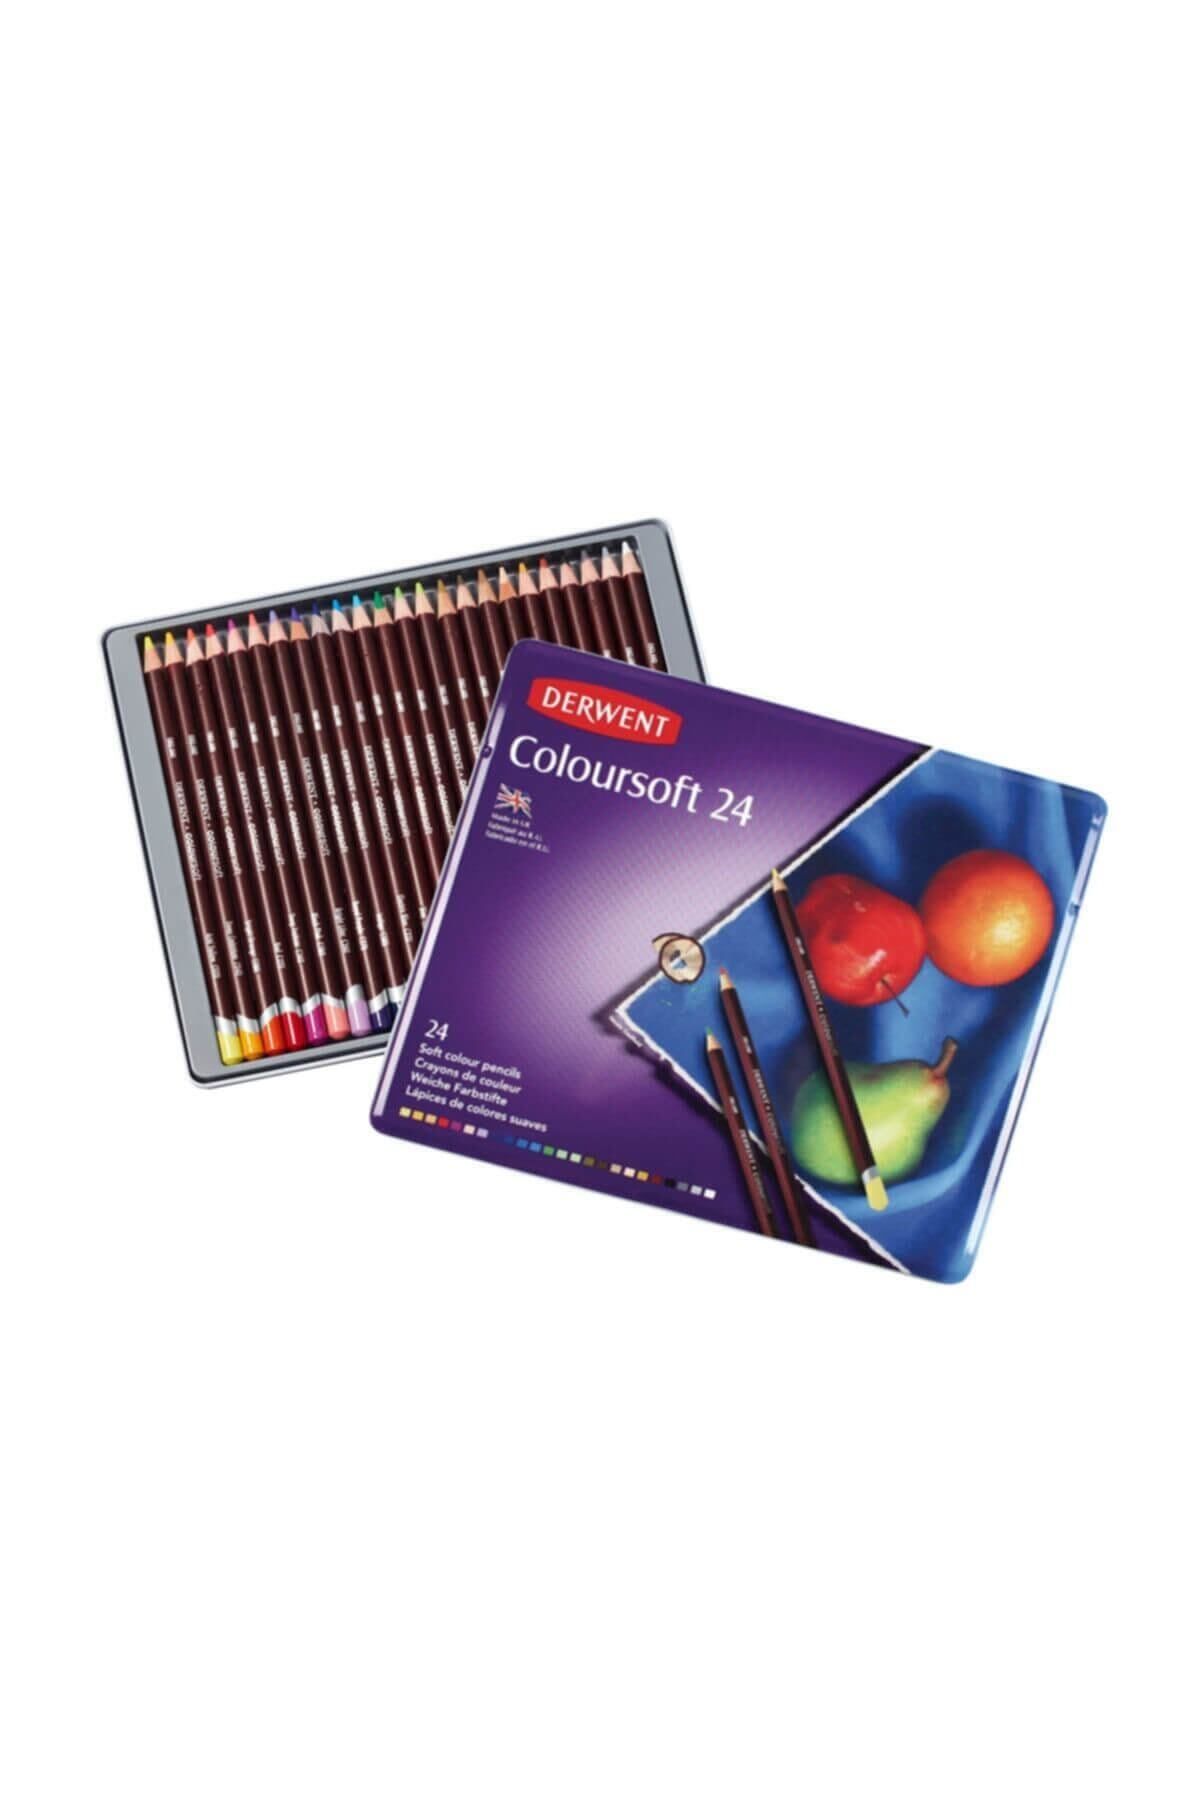  Derwent Colored Drawing Pencils, 5mm Core, Metal Tin, 12 Count  (0700671) : Wood Colored Pencils : Arts, Crafts & Sewing